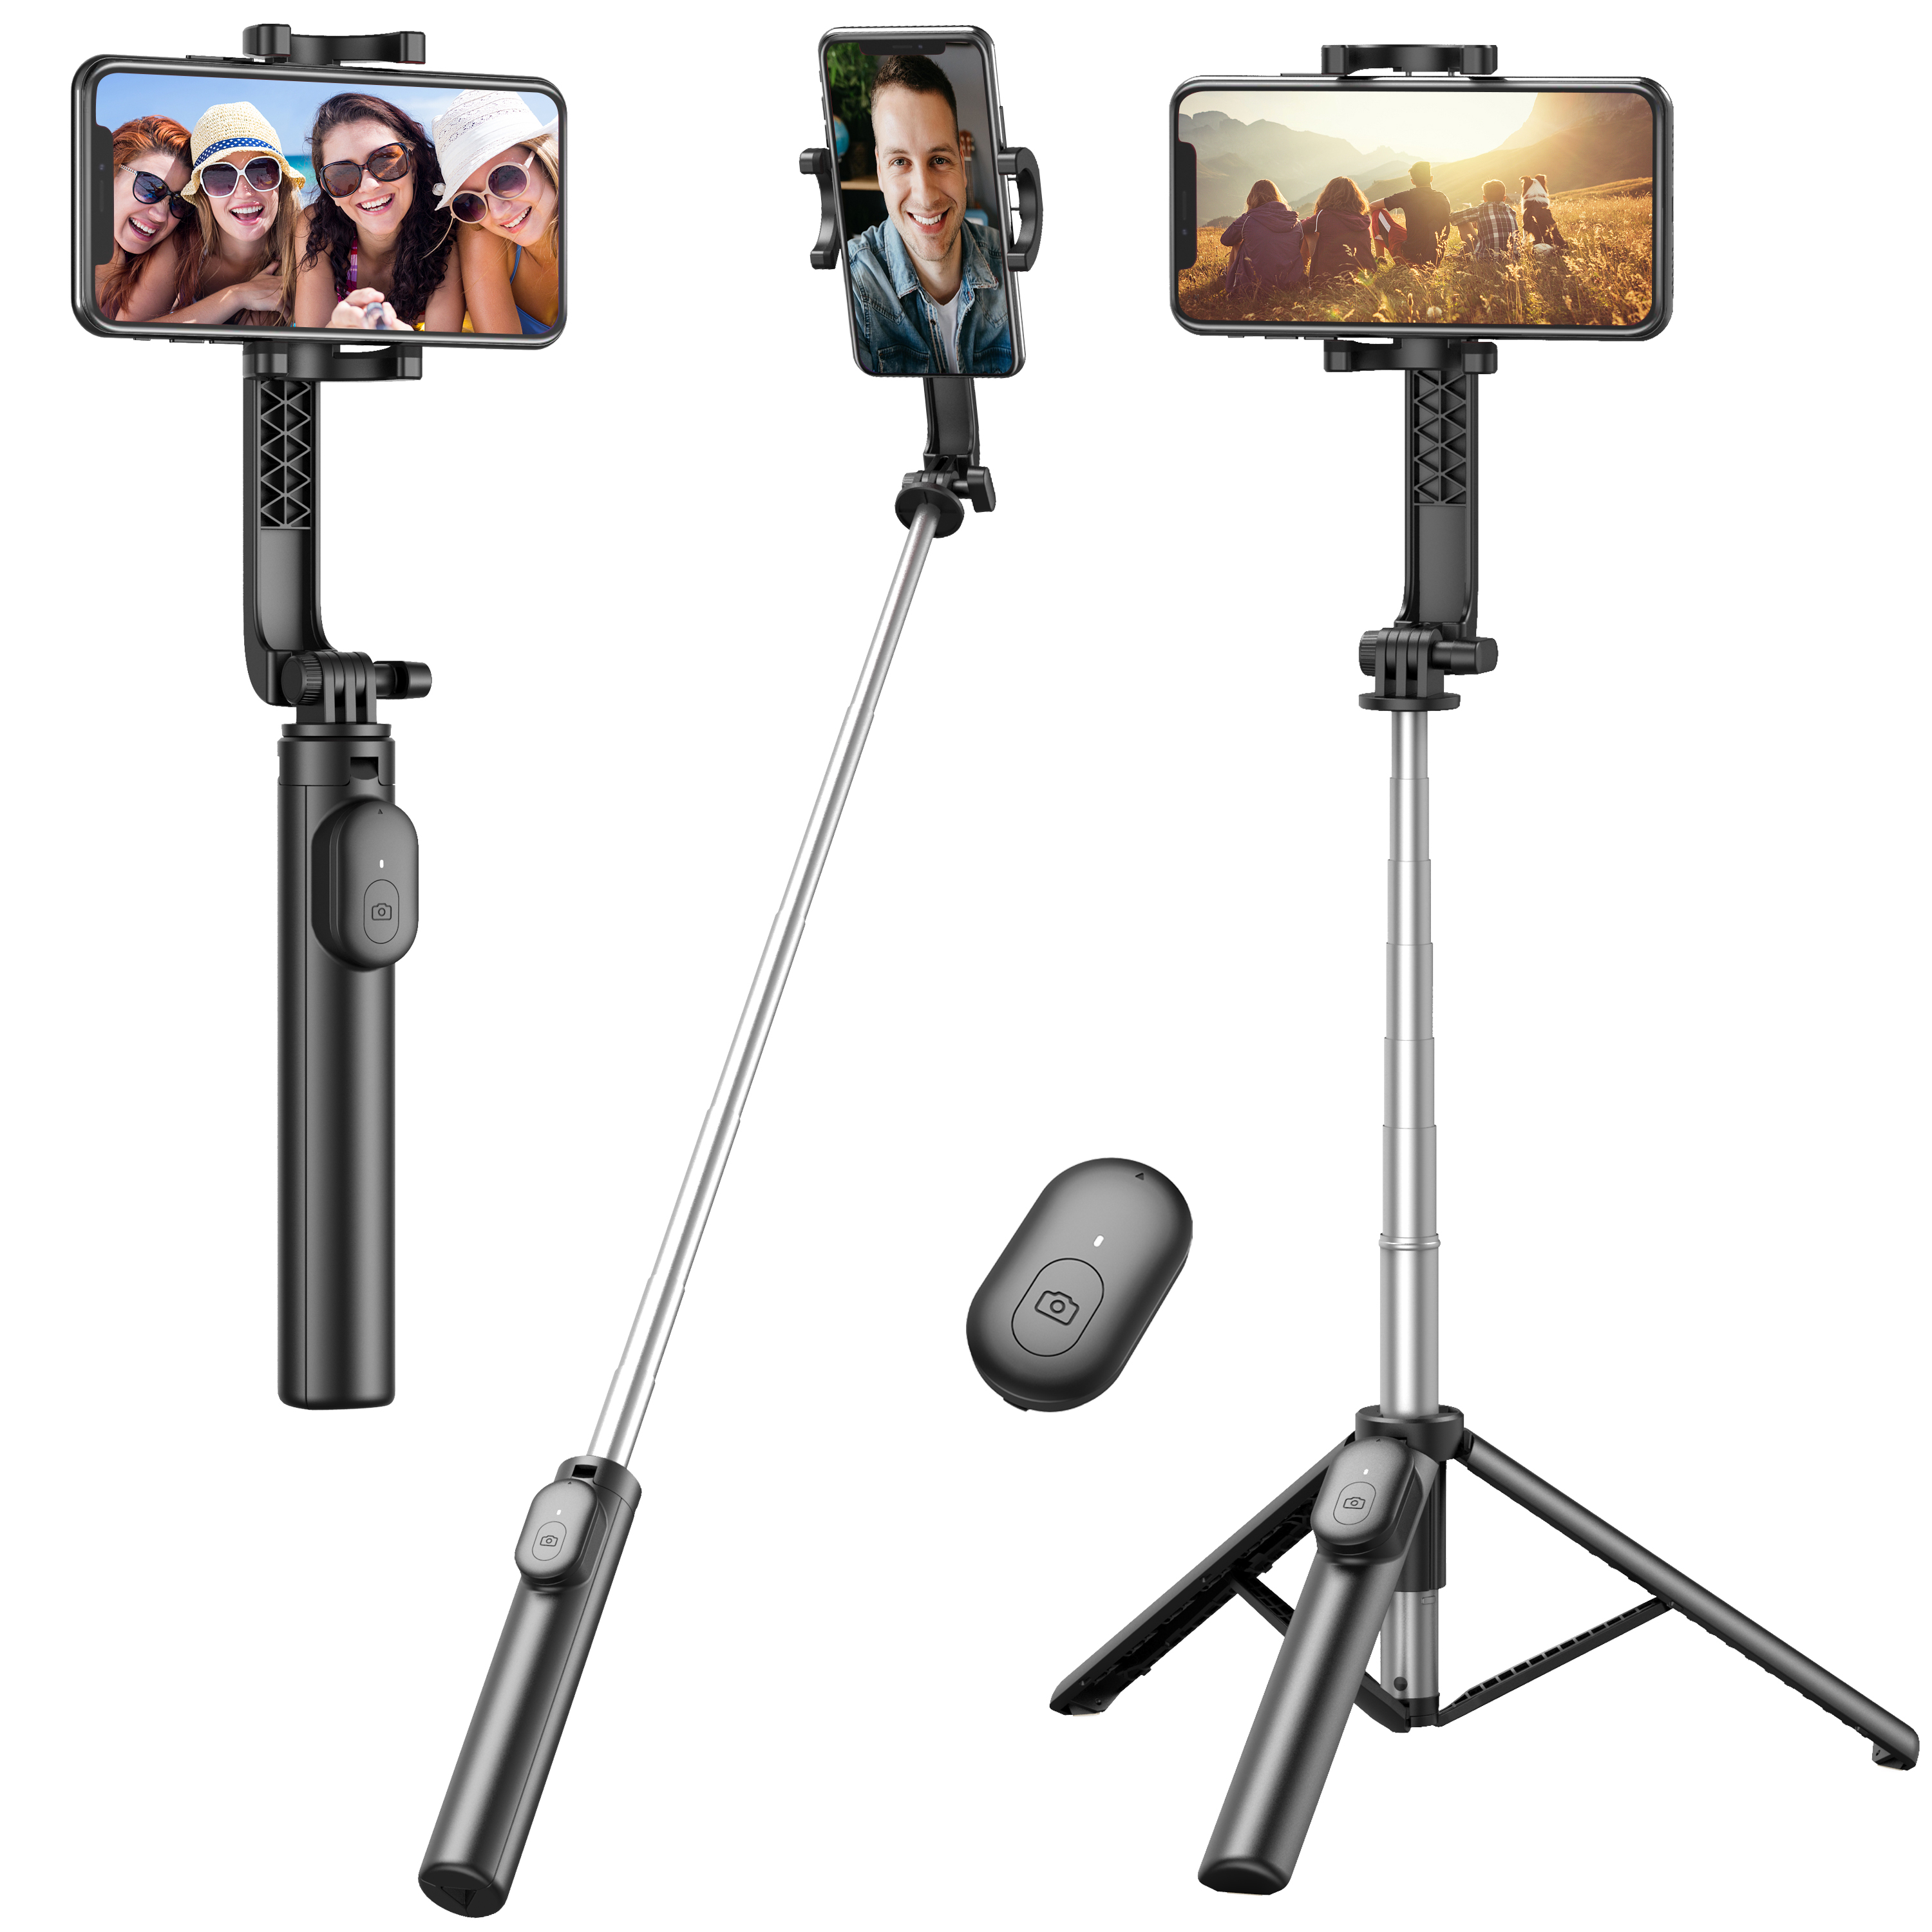  Selfie Stick, Extendable Selfie Stick Tripod with Detachable Wireless Remote and Tripod Stand Selfie Stick Compatible with All Cell Phone, Compact Size & Lightweigh  